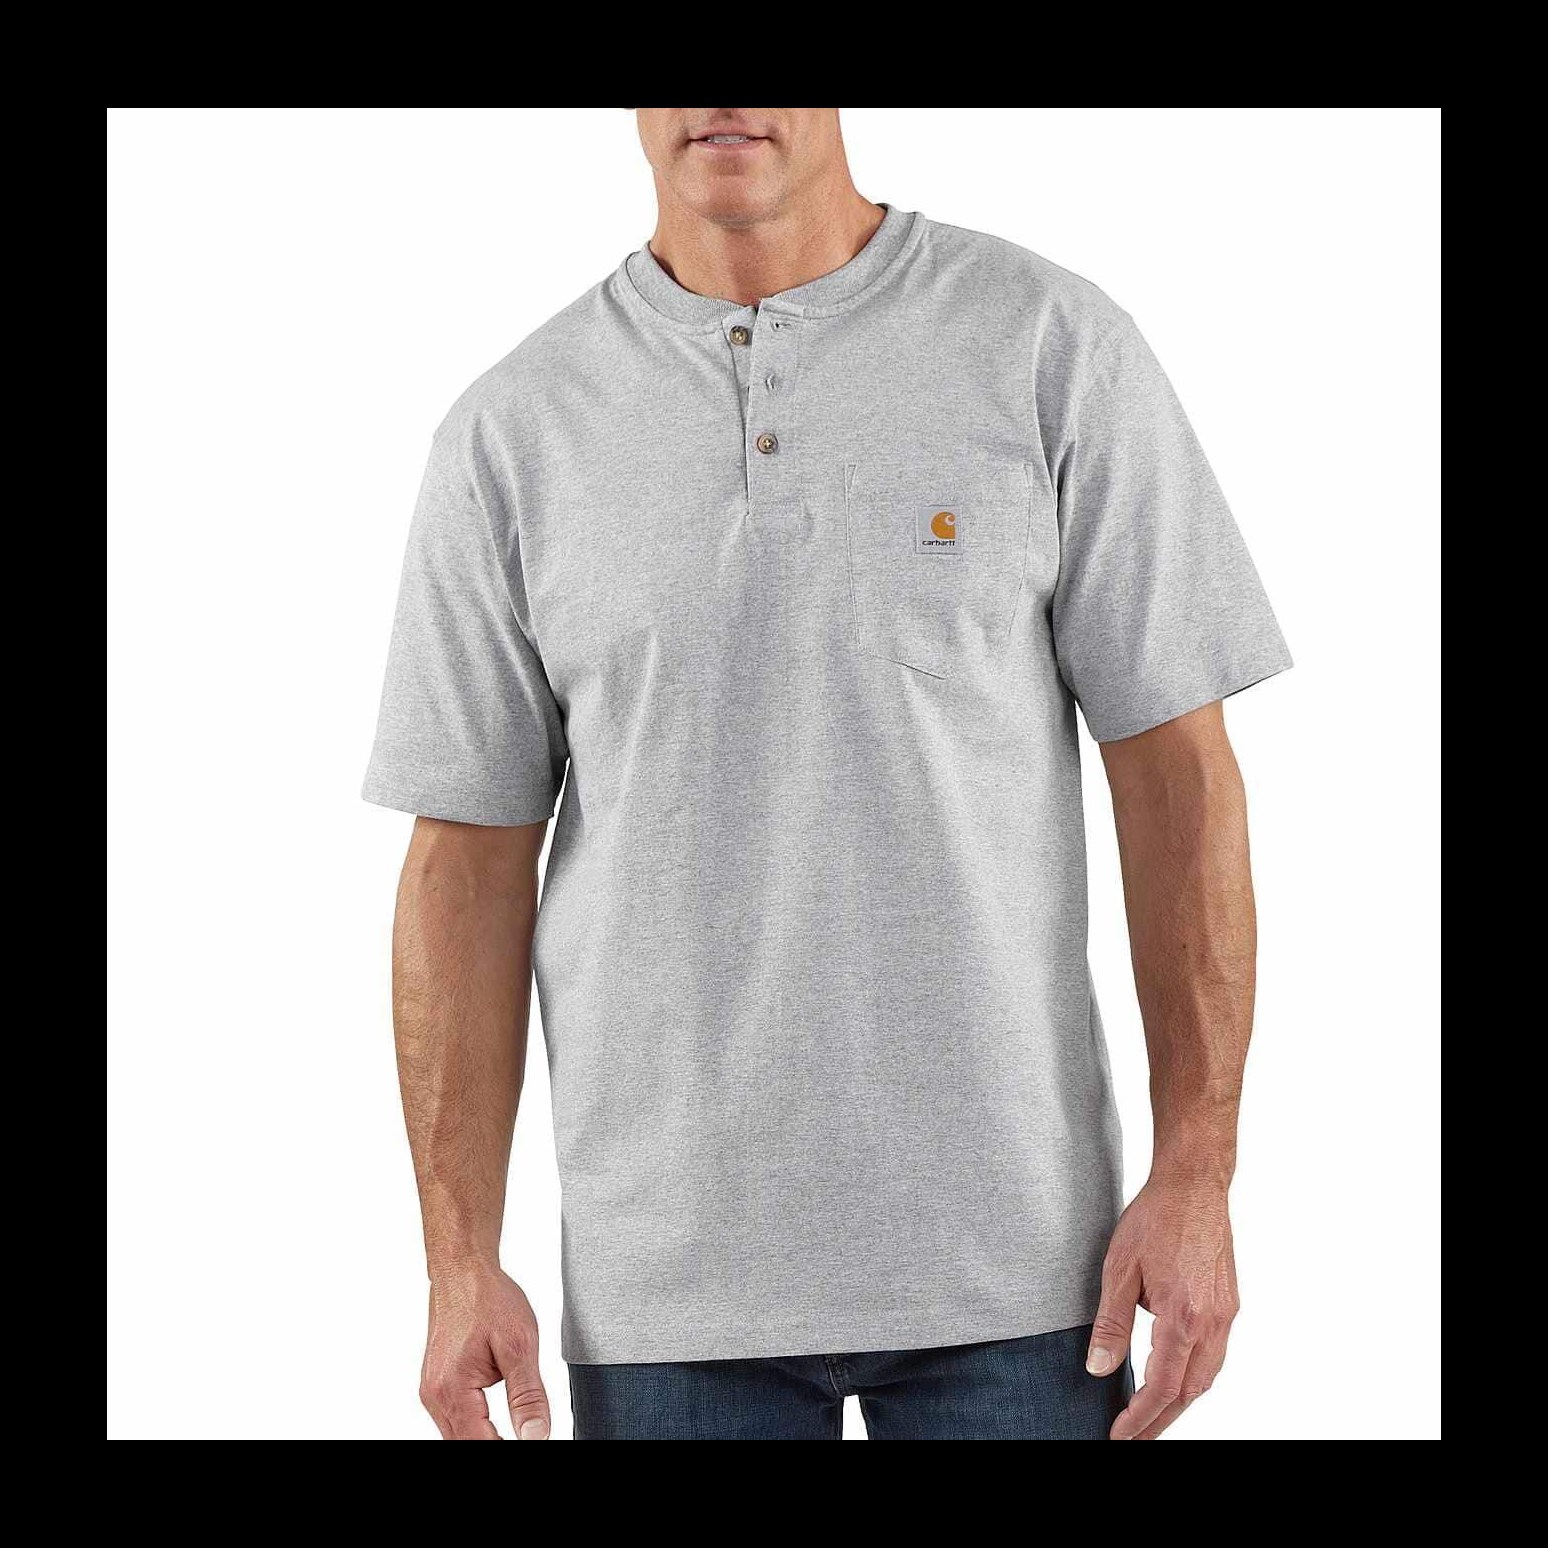 Rugged Earth Outfitters Short Sleeve Tops & T-Shirts for Boys